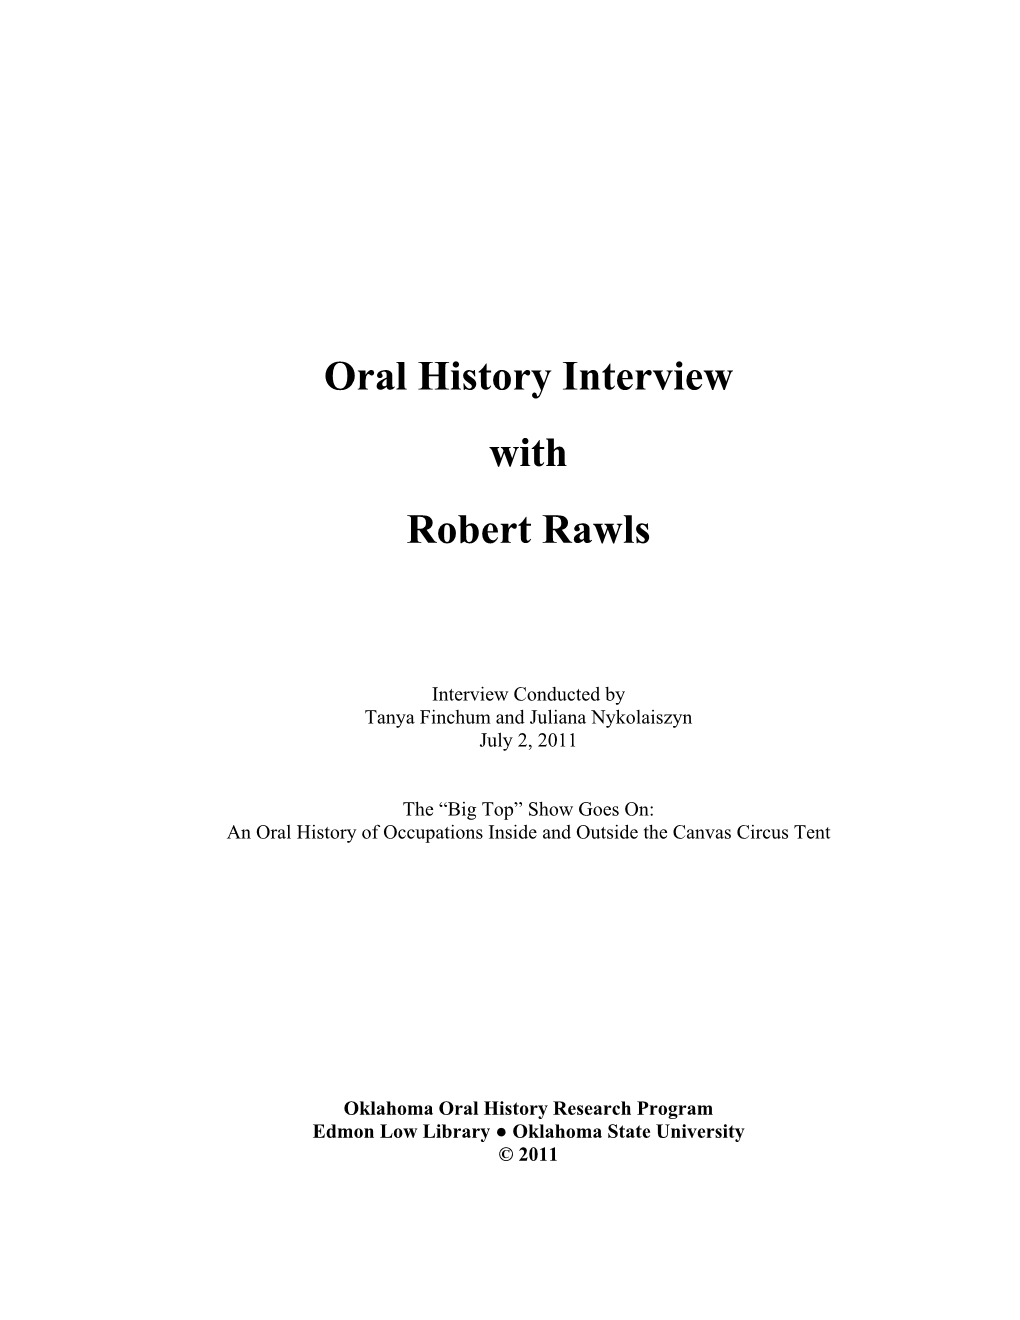 Oral History Interview with Robert Rawls